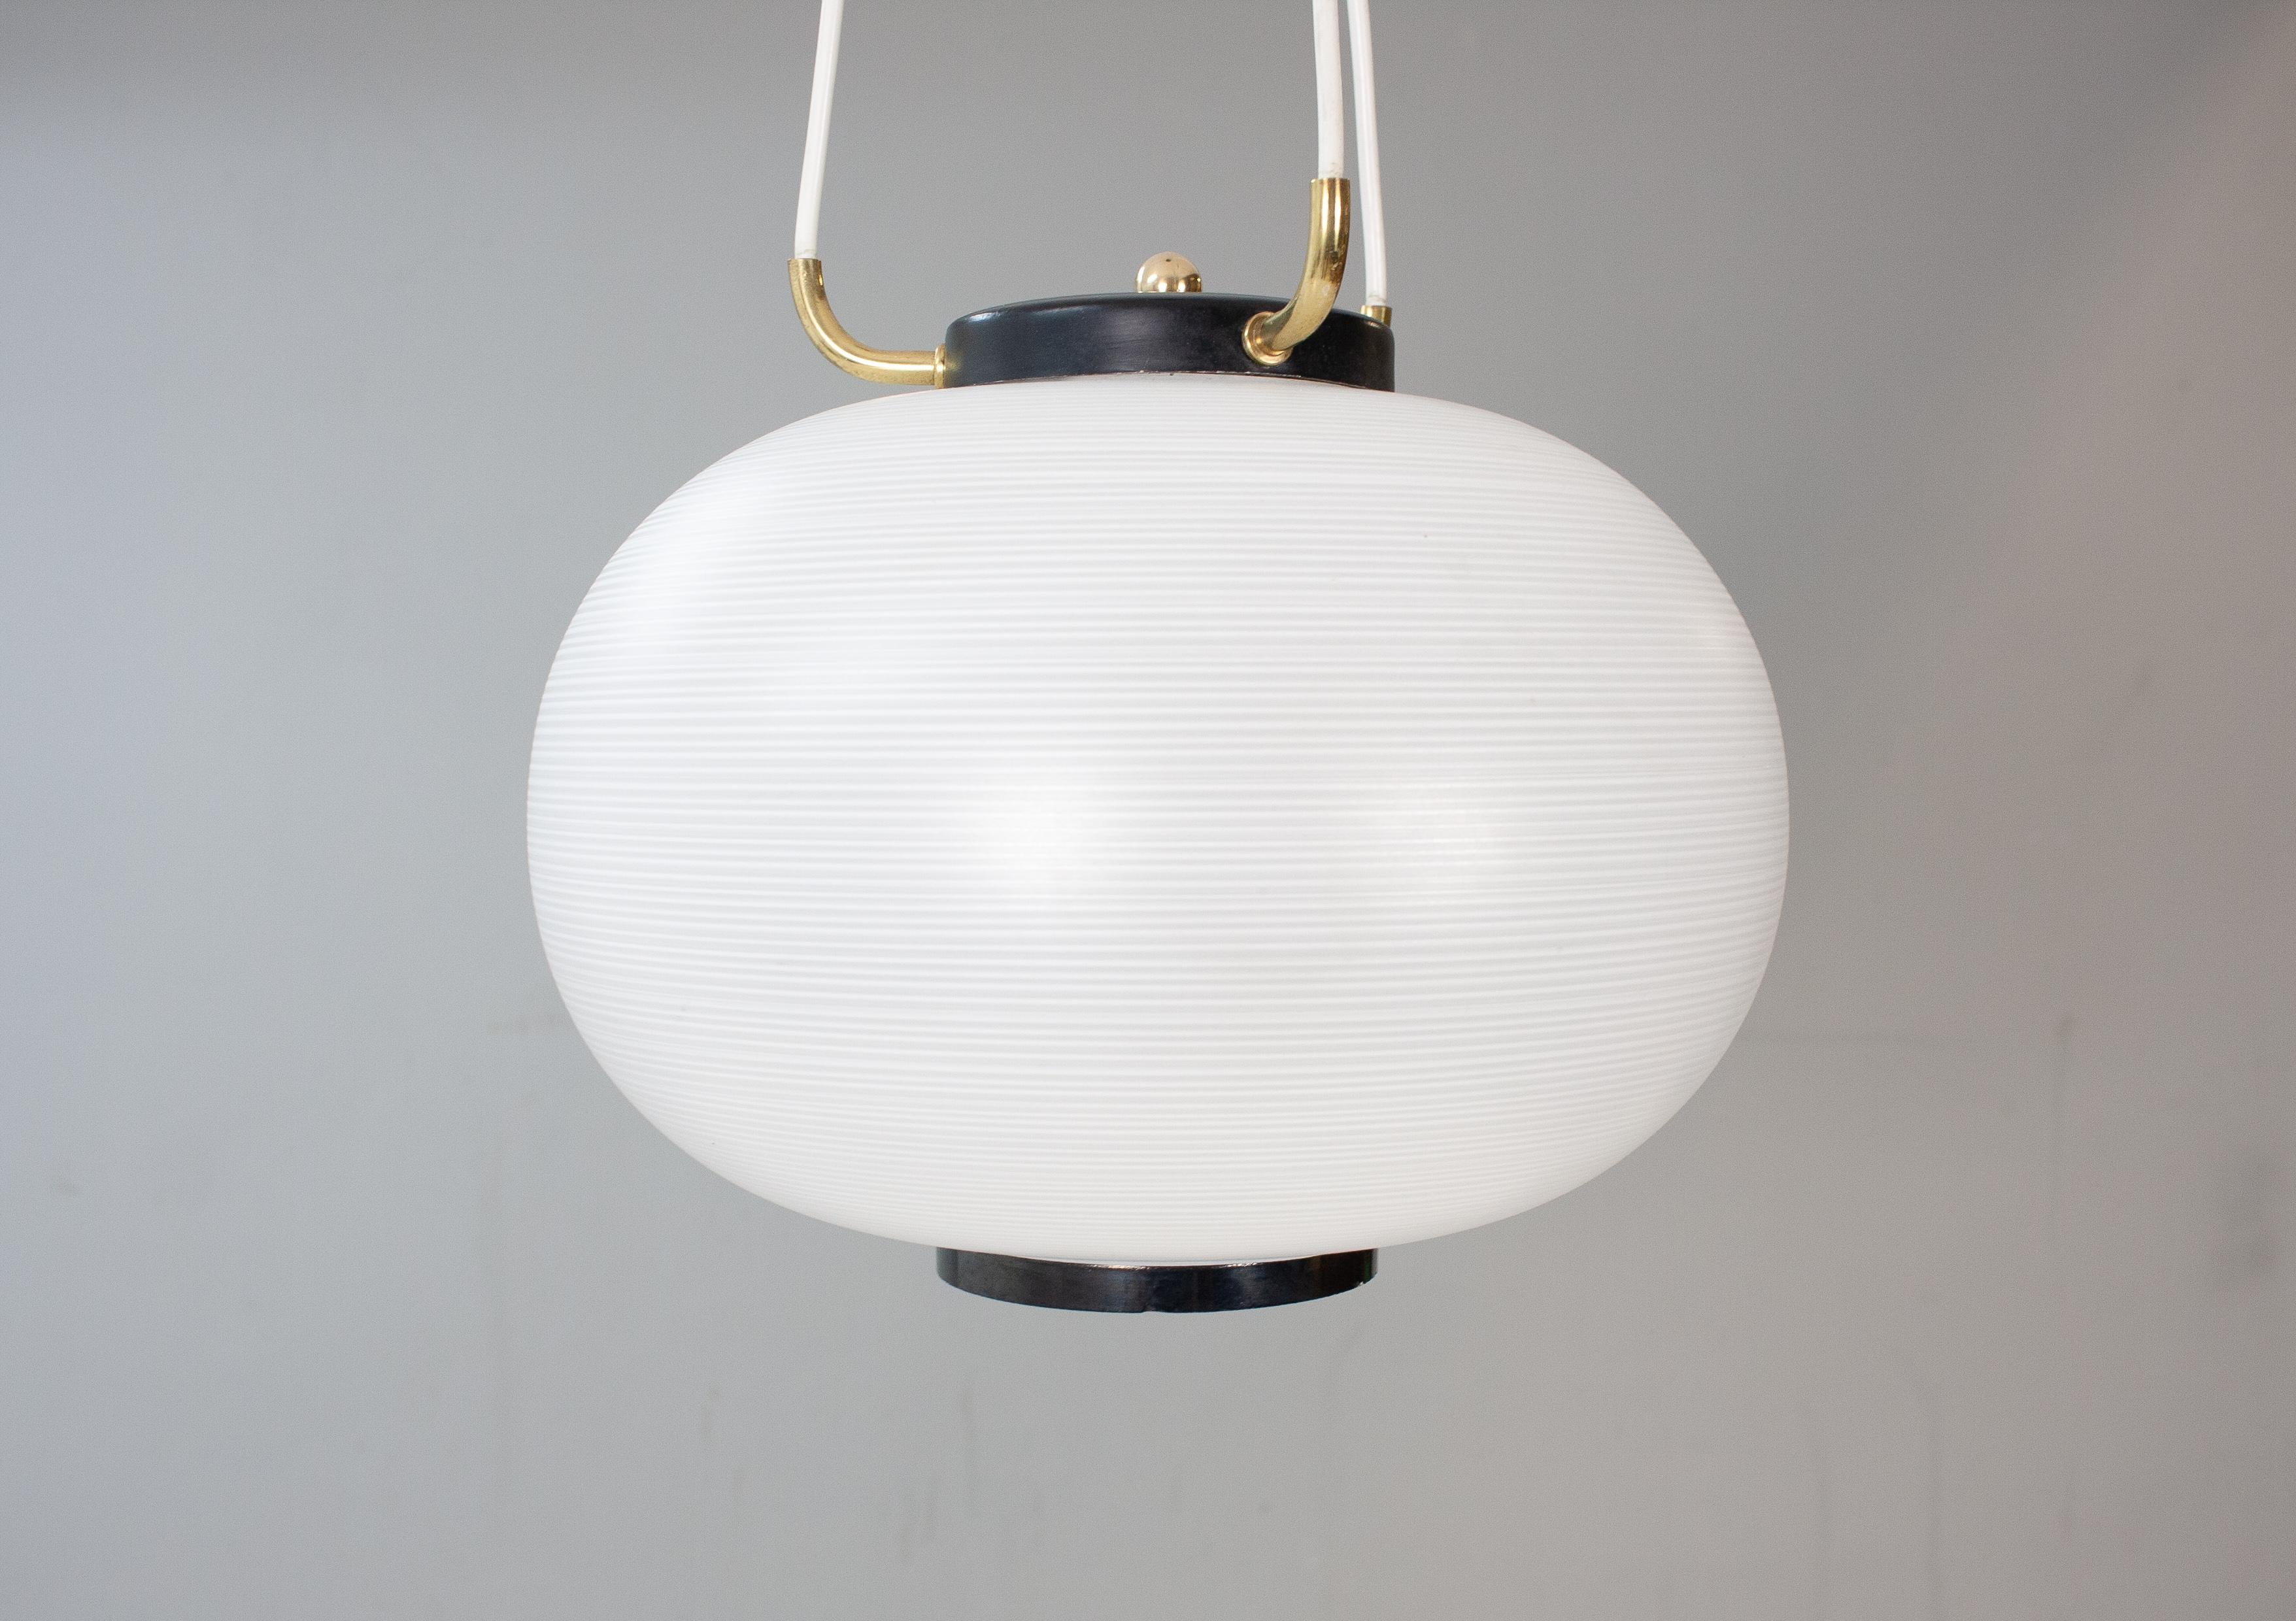 Stilnovo pendant lamp, 1950s-1960s. Featuring a striped opaline body and brass details.
new old stock, the brass canopy is new.